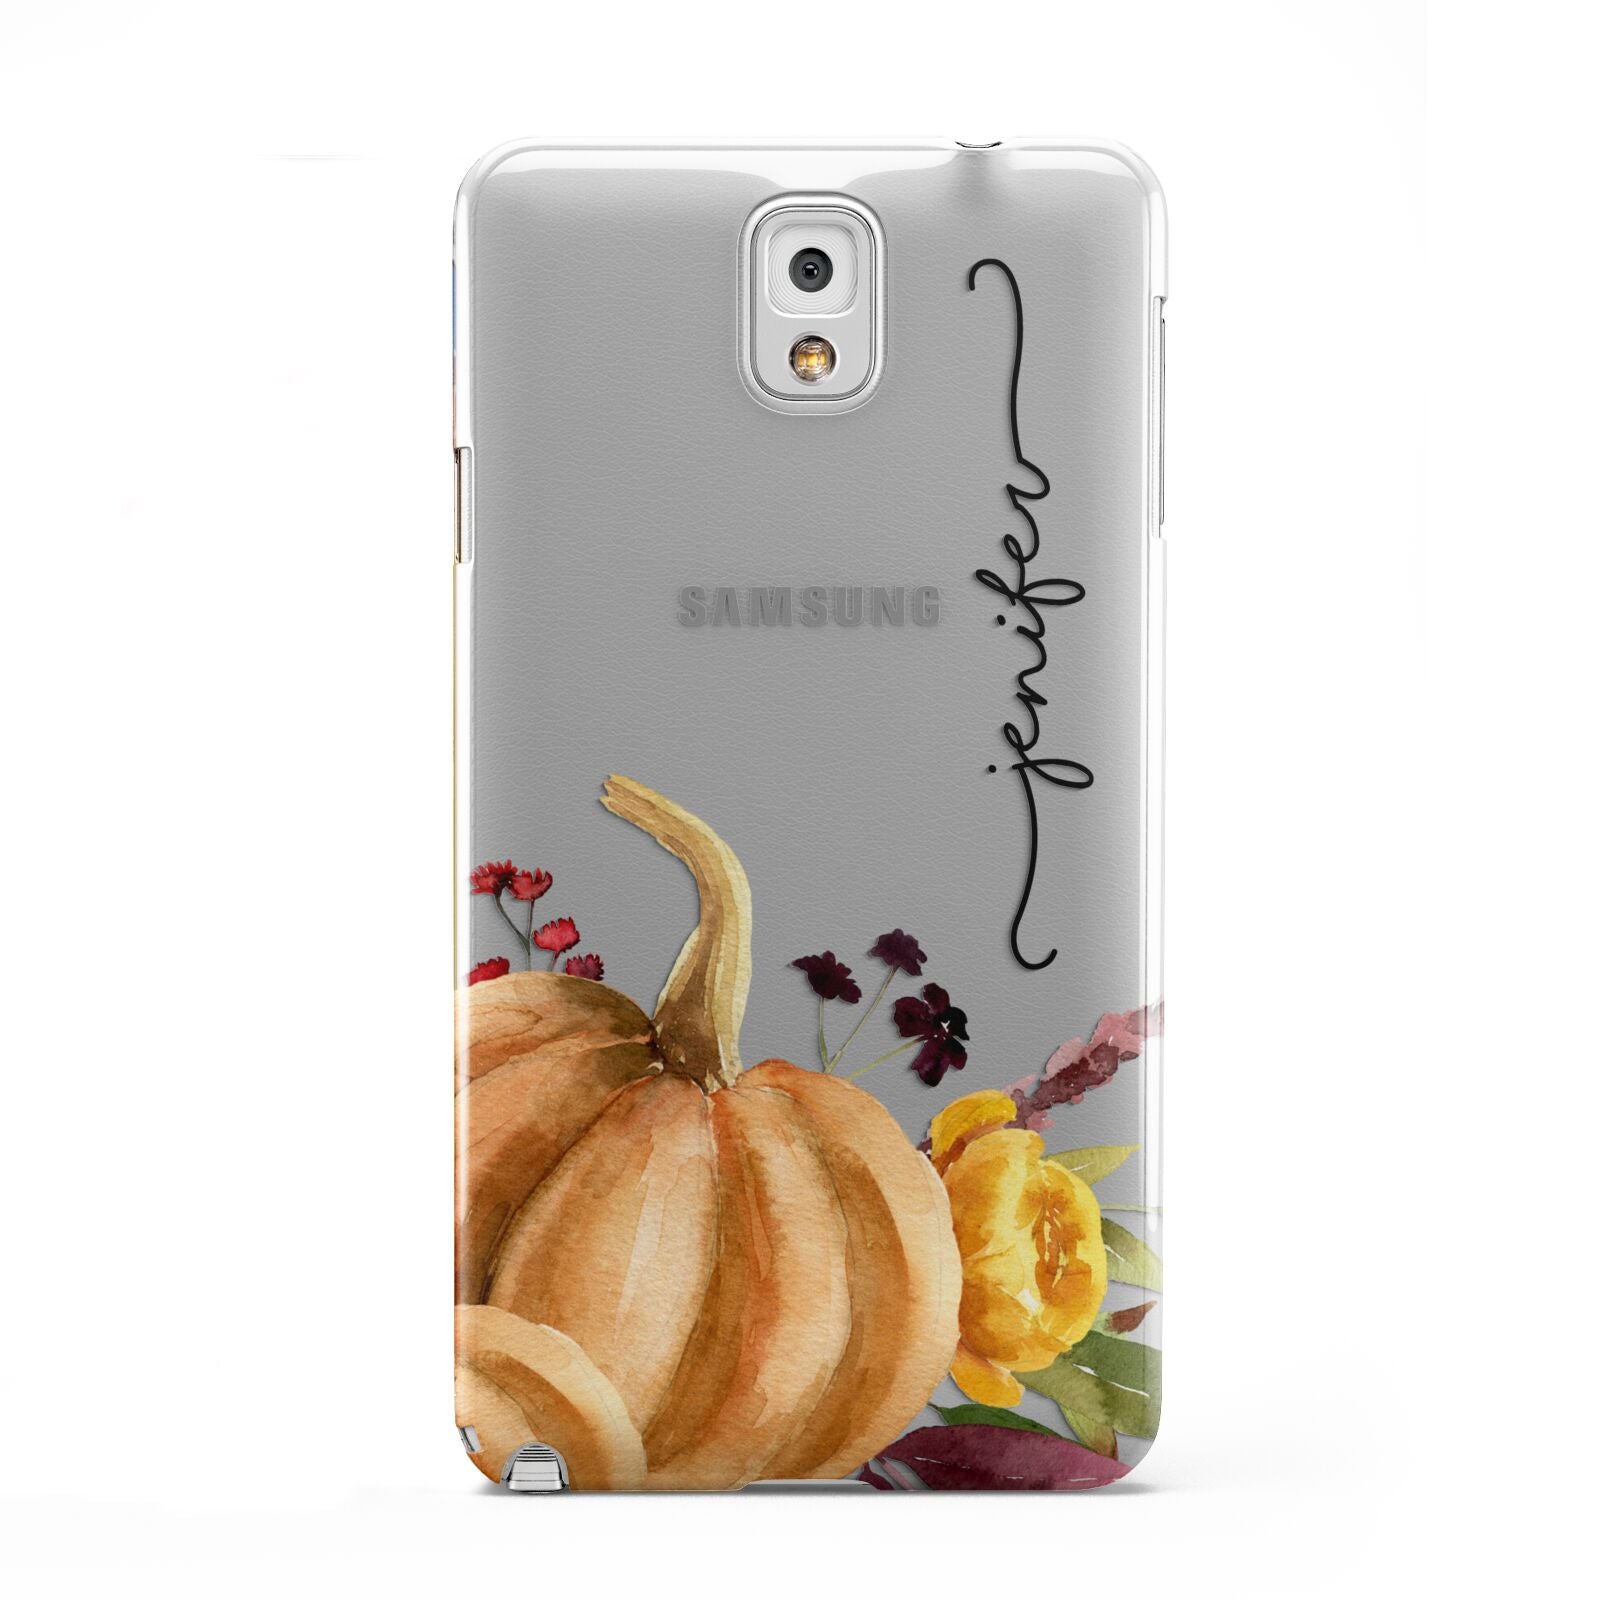 Watercolour Pumpkins with Black Vertical Text Samsung Galaxy Note 3 Case